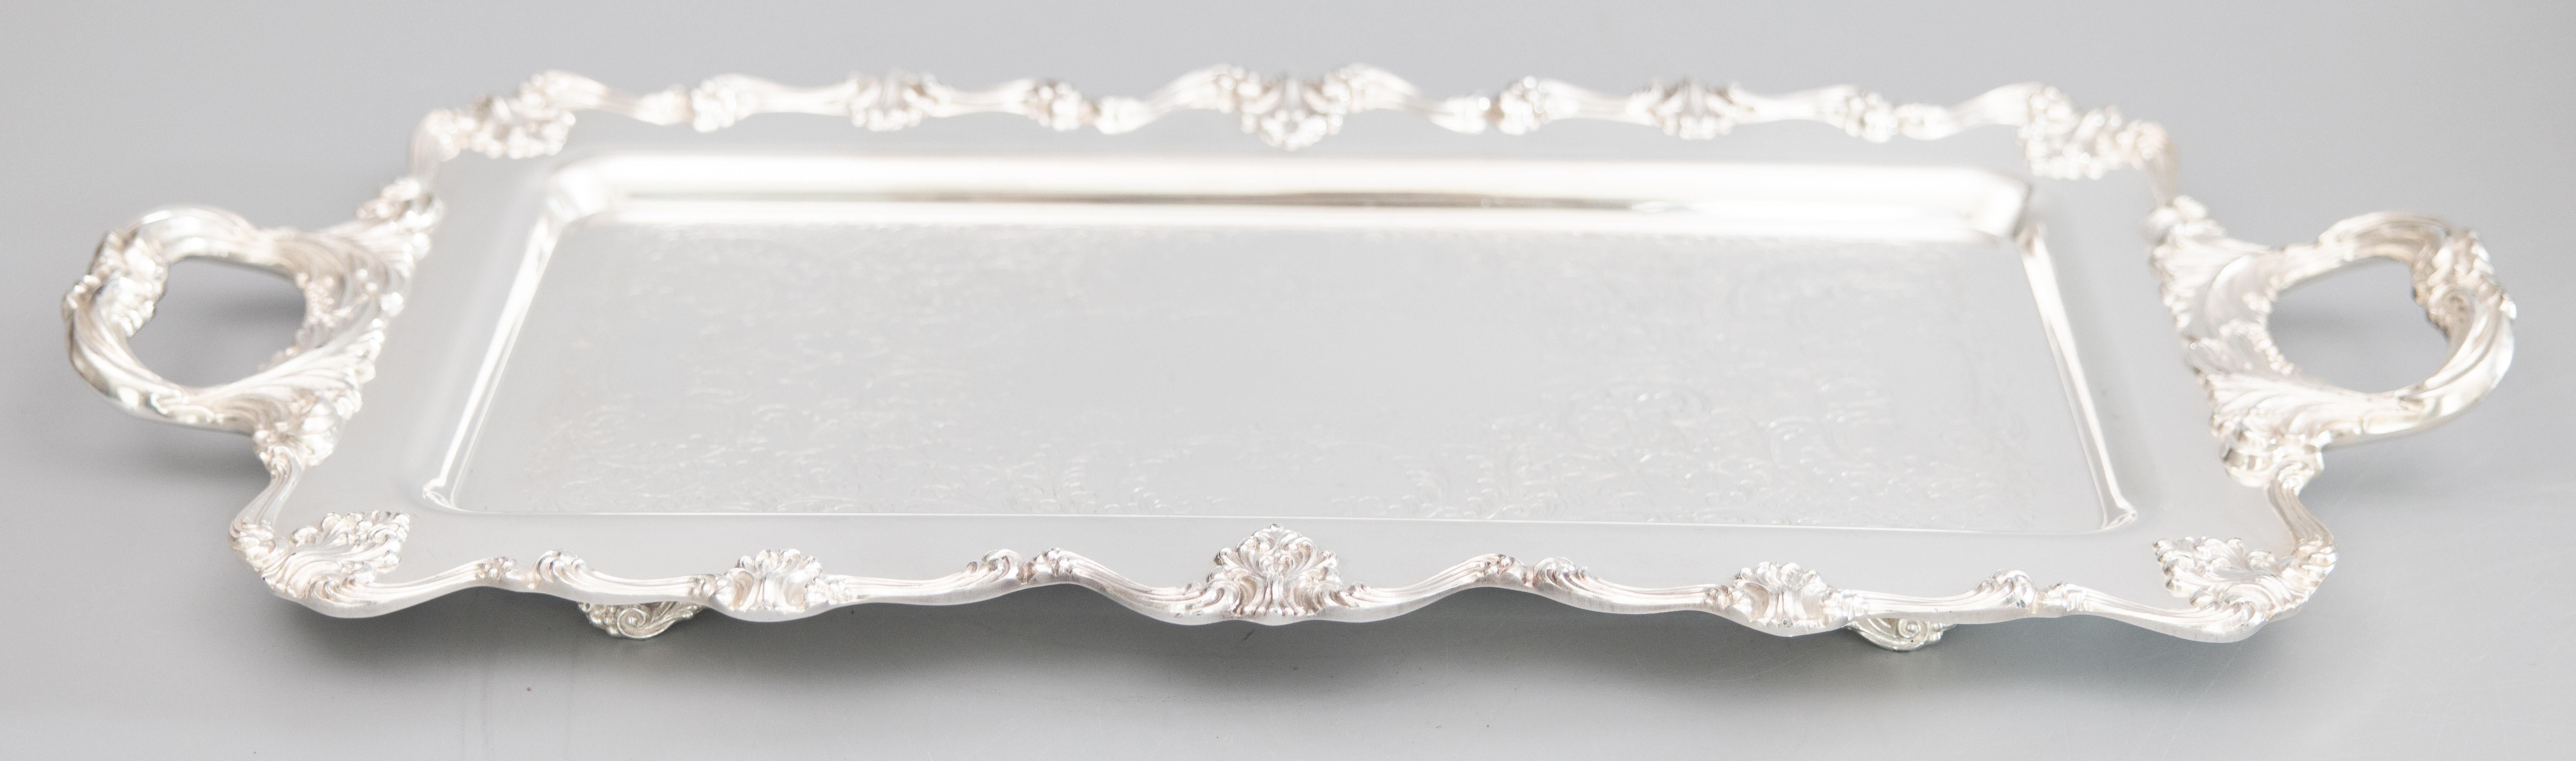 A fine vintage 1930s silverplate footed serving or barware tray with handles by W&S Blackinton. Maker's mark on reverse. This gorgeous tray is large and heavy, weighing over 7 lbs, with lovely floral etching and an ornate decorative border and shell